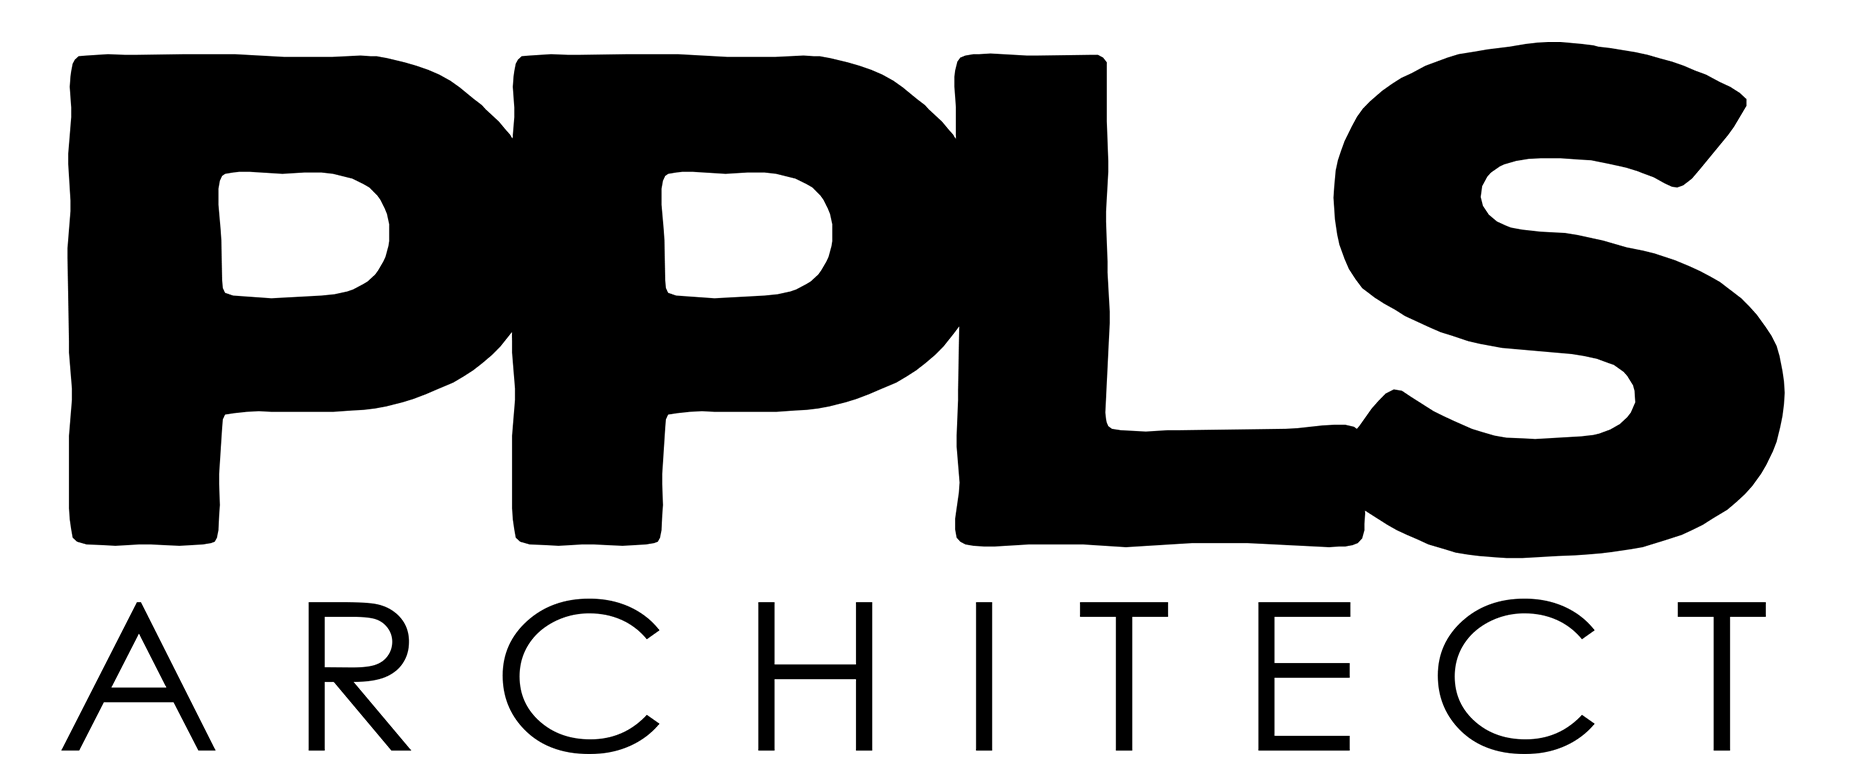 People's Architect Design Solutions|Architect|Professional Services